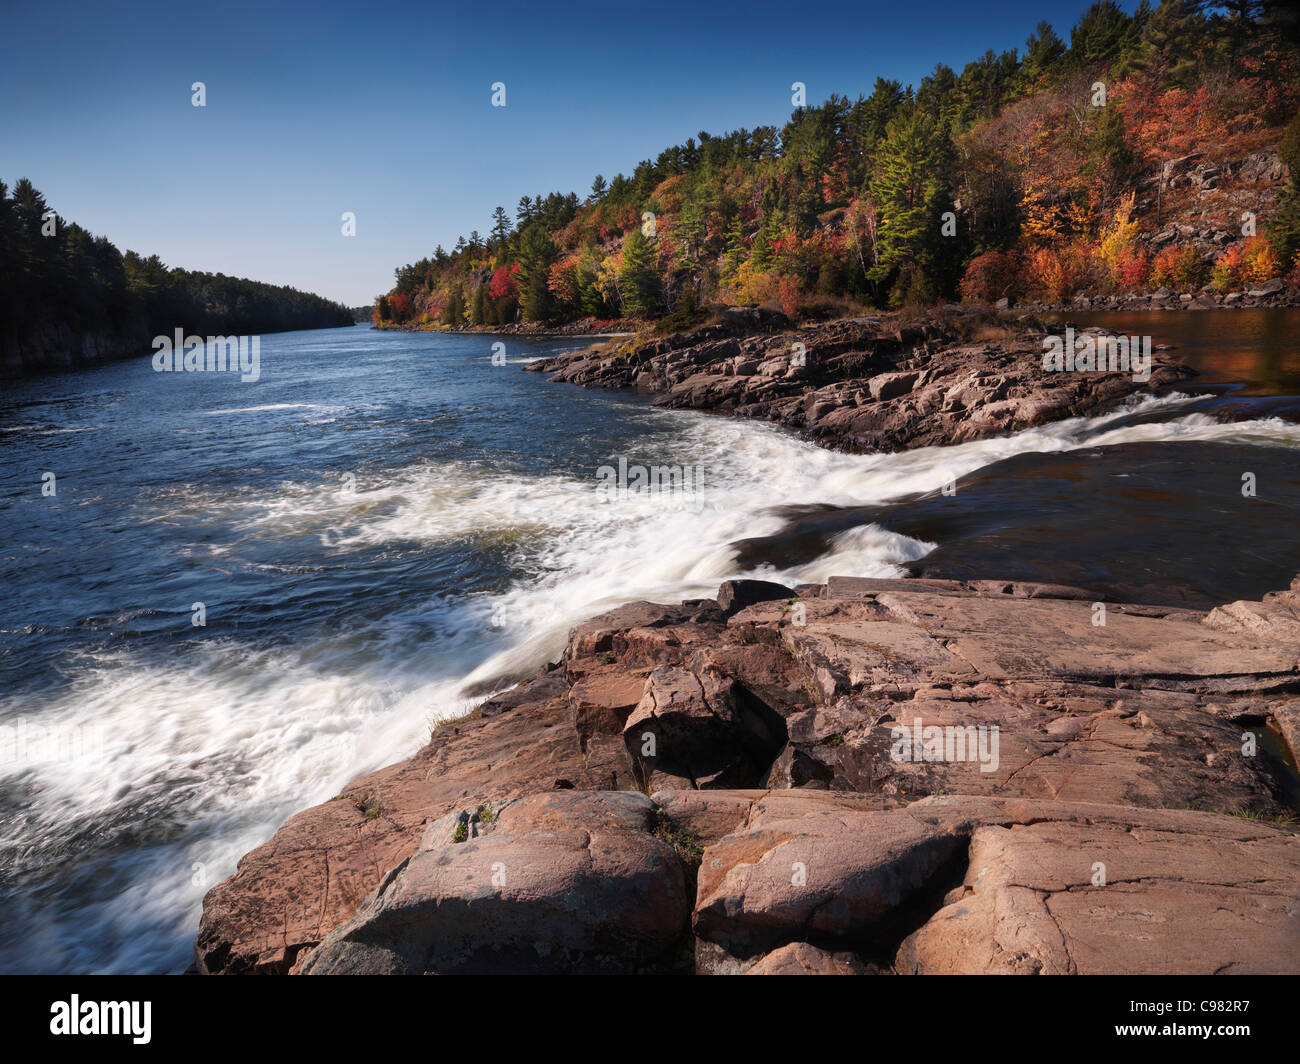 Recollet Falls of the French River. Autumn nature scenery, Ontario, Canada. Stock Photo